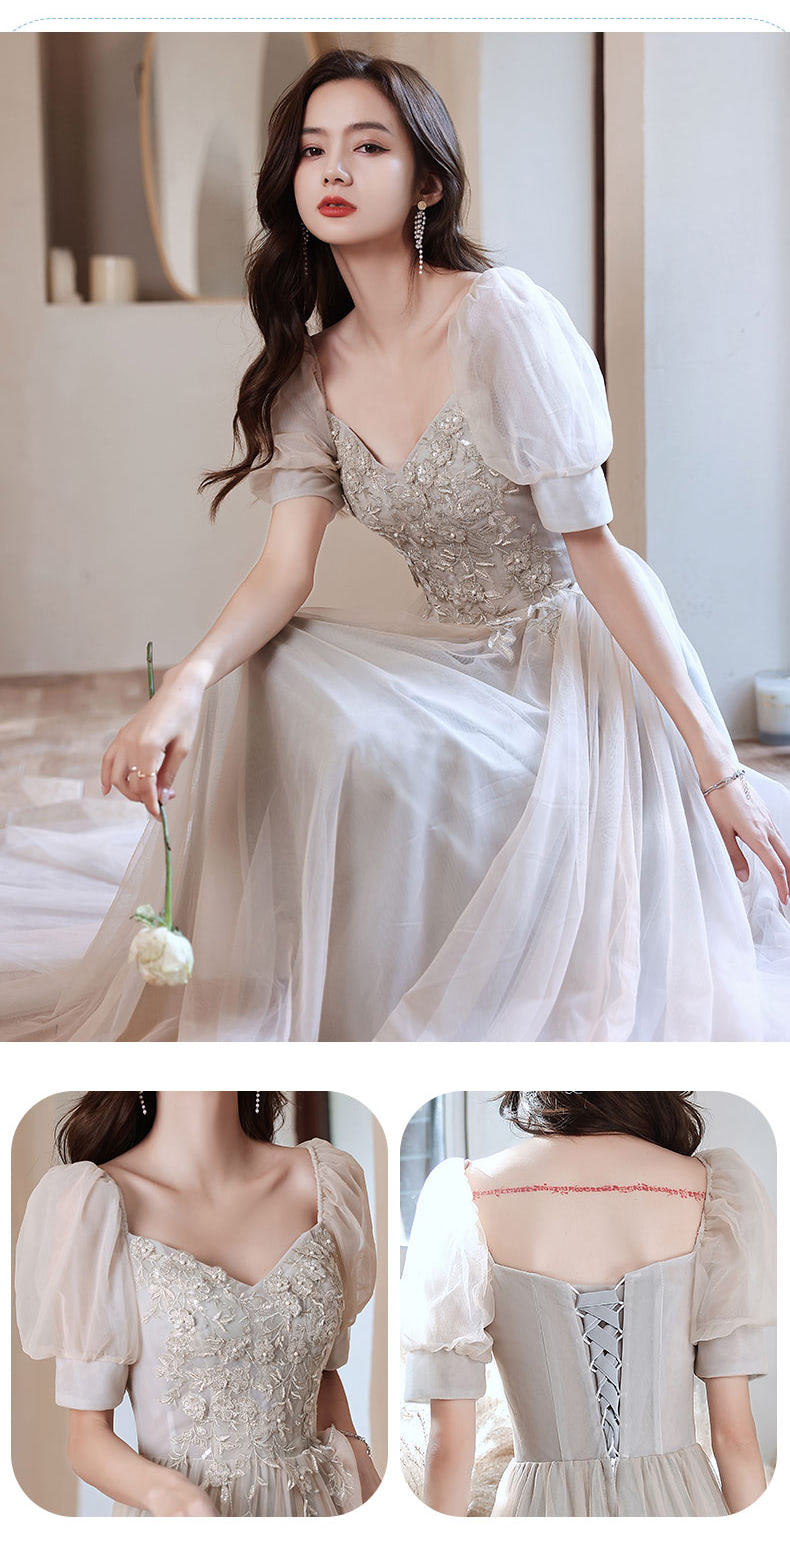 Multiway-Maxi-Bridesmaid-Dress-Wedding-Guest-Long-Formal-Outfit17.jpg